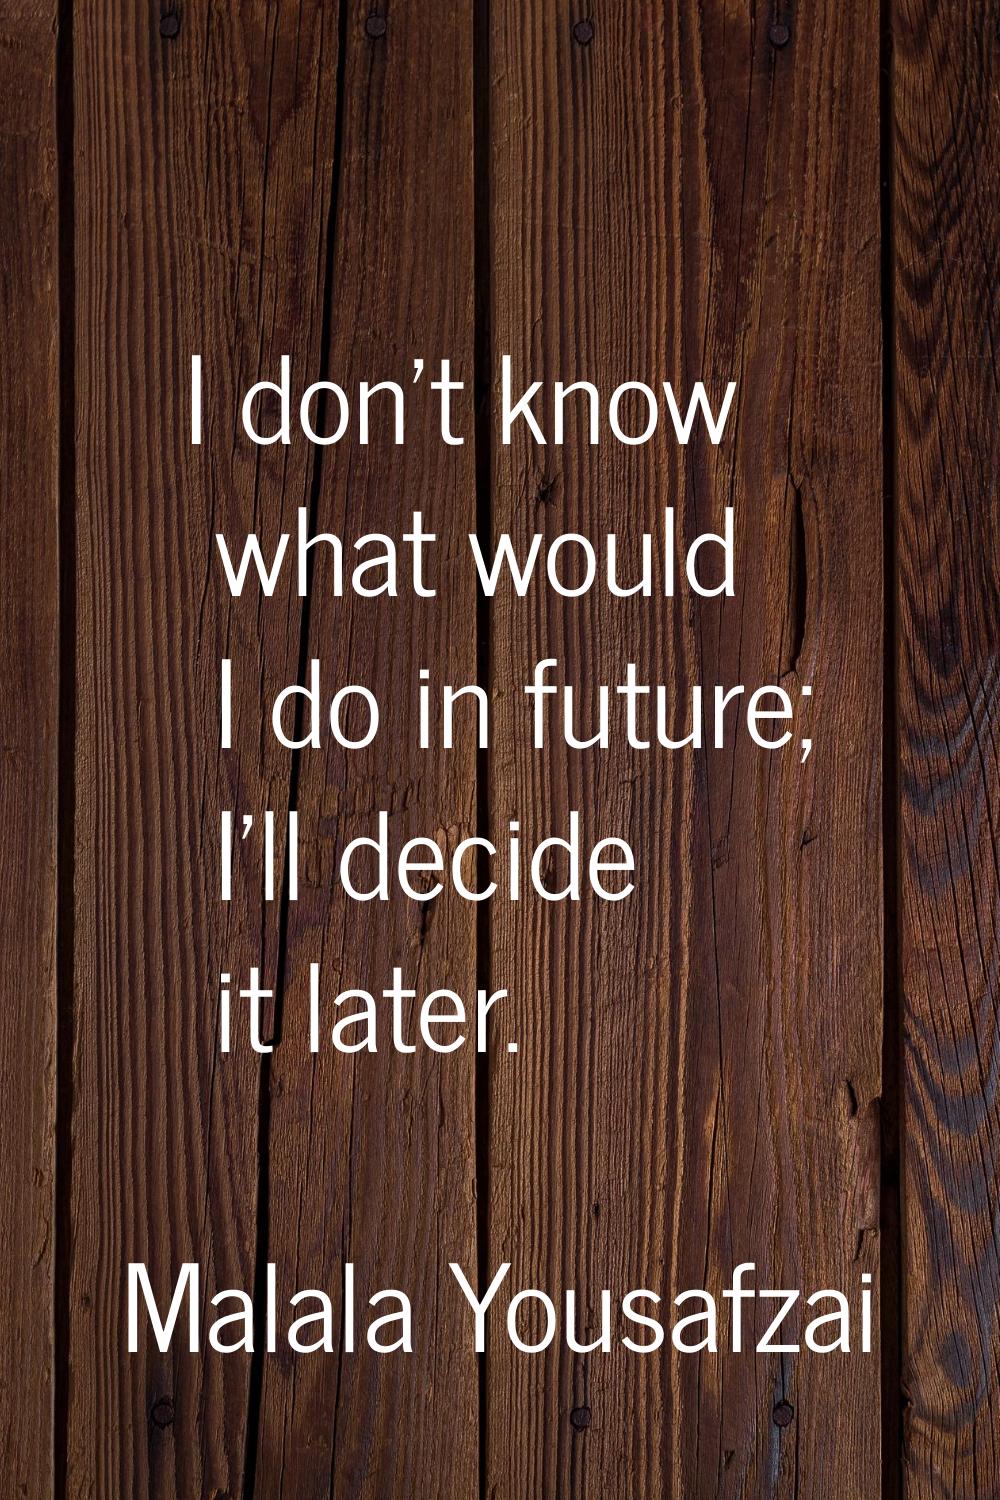 I don't know what would I do in future; I'll decide it later.